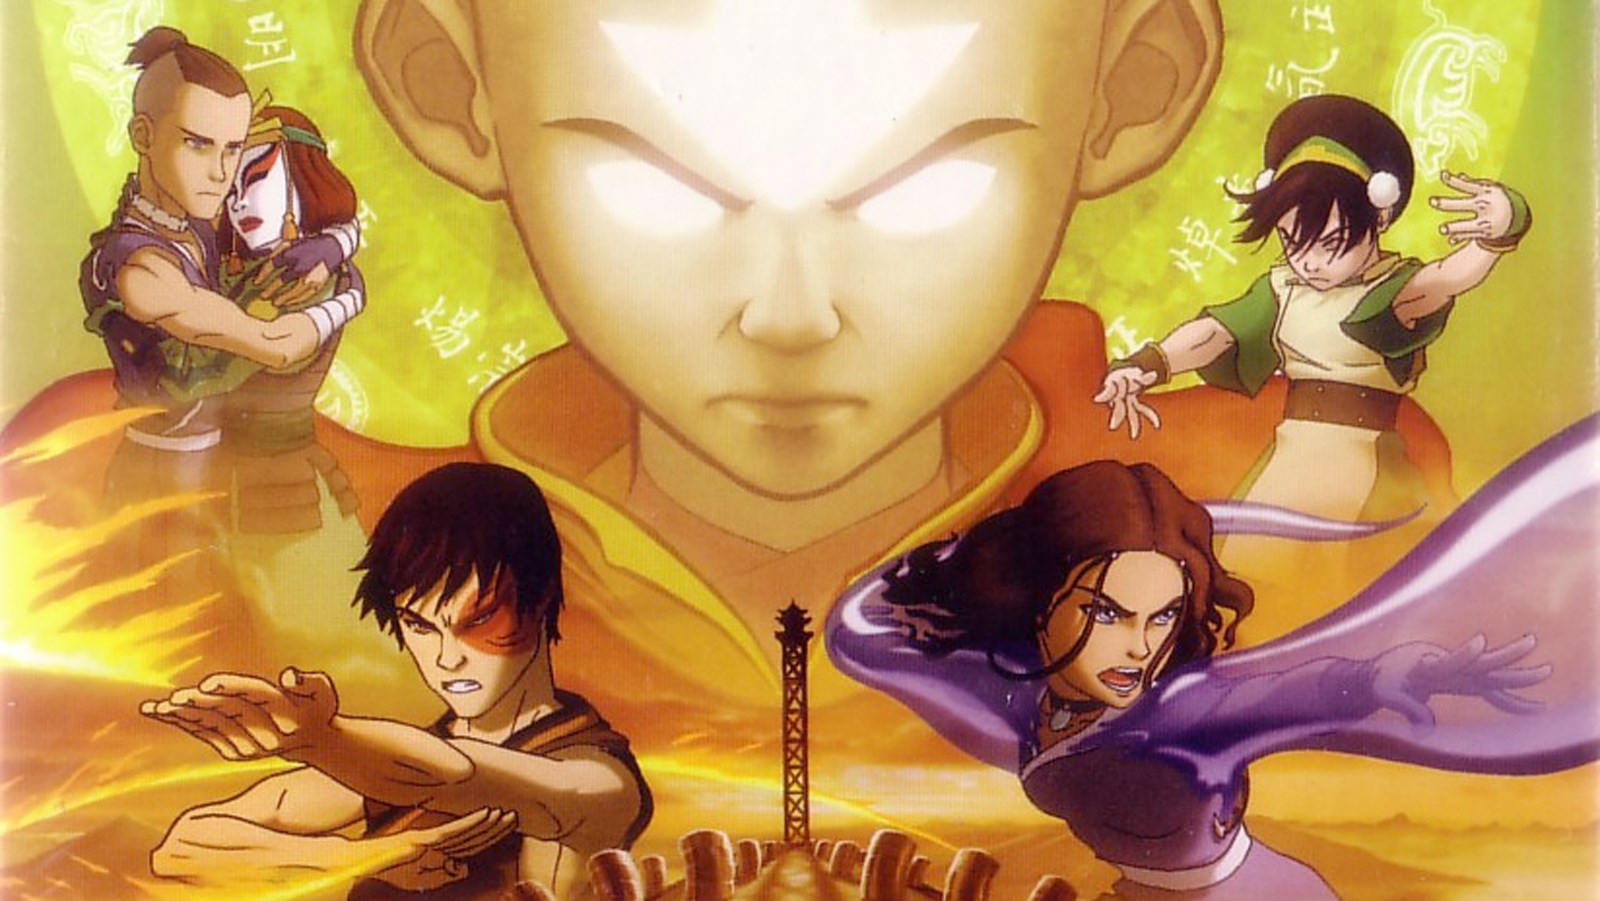 Hear Us Out The Legend of Korra Made Avatar The Last Airbender Even  Better  Rotten Tomatoes